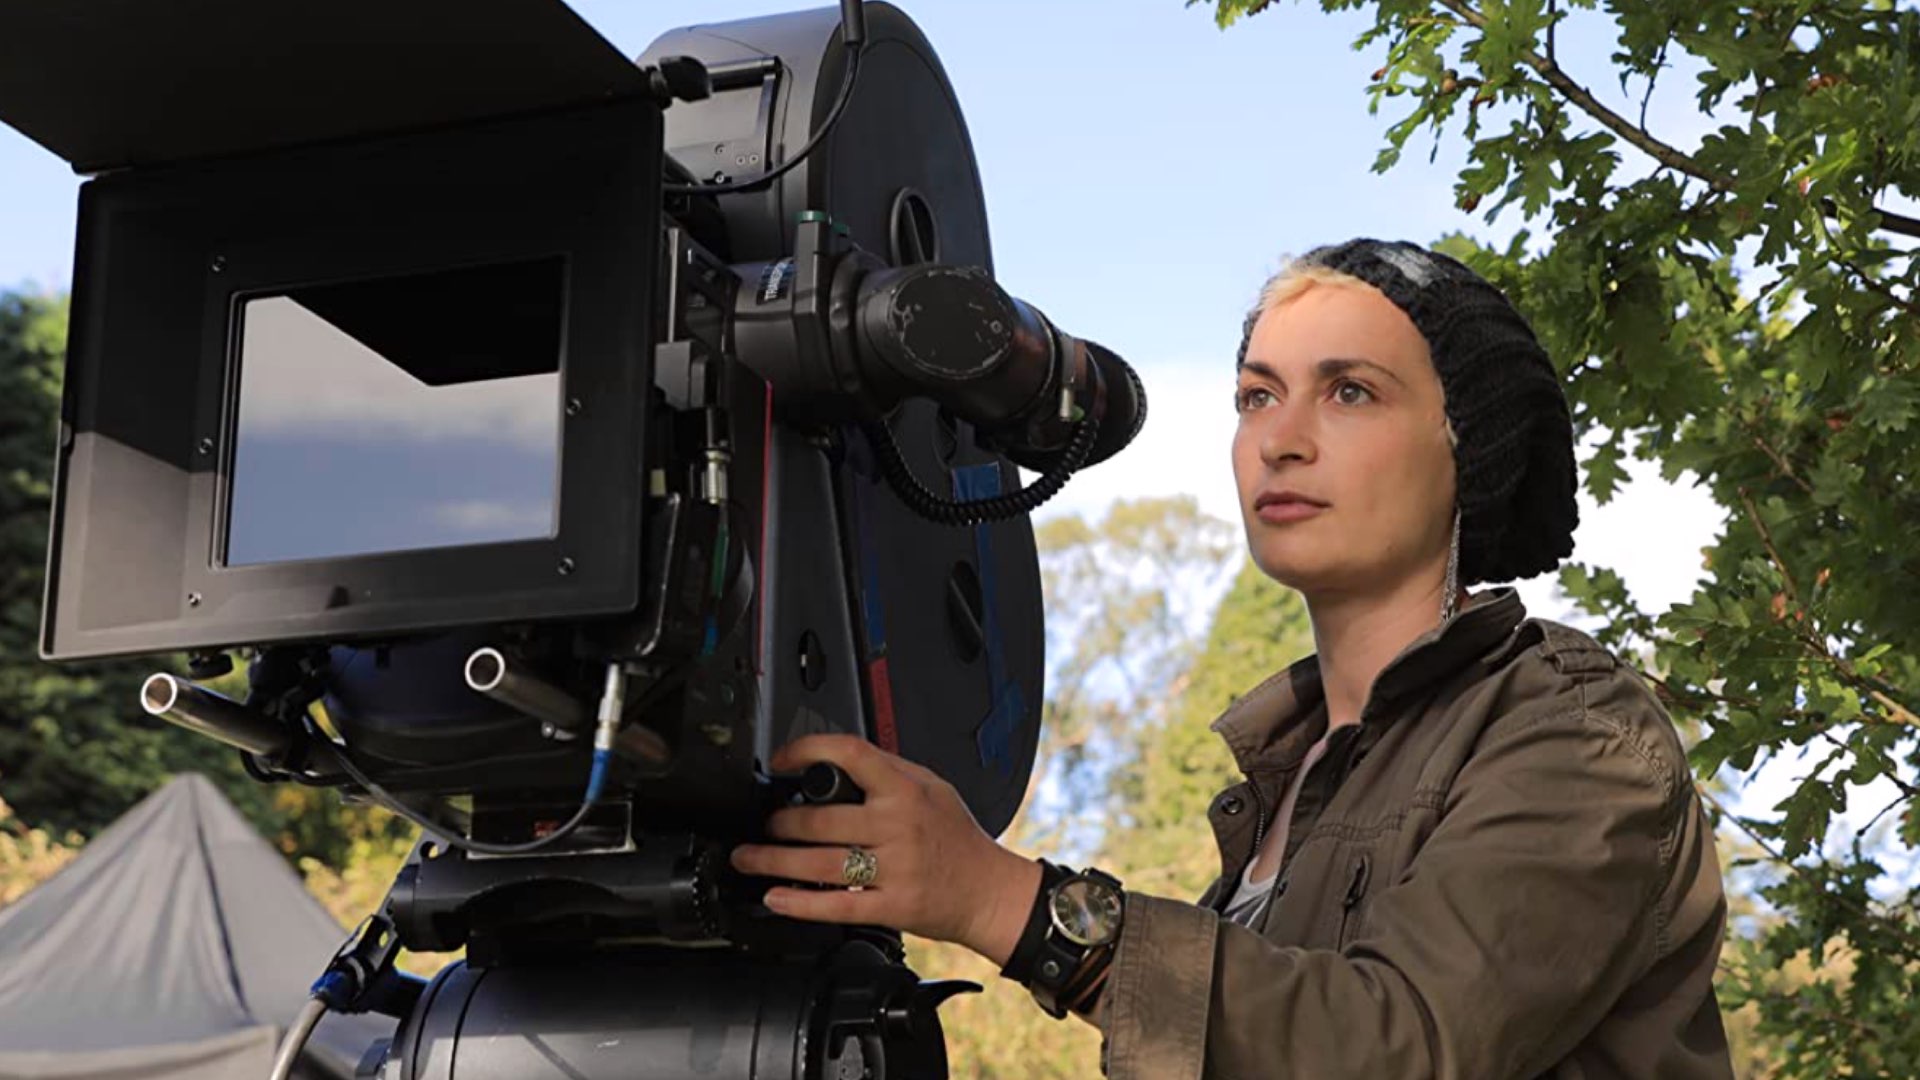 Cinematographer Halyna Hutchins Was Shot and Killed by a Prop Gun